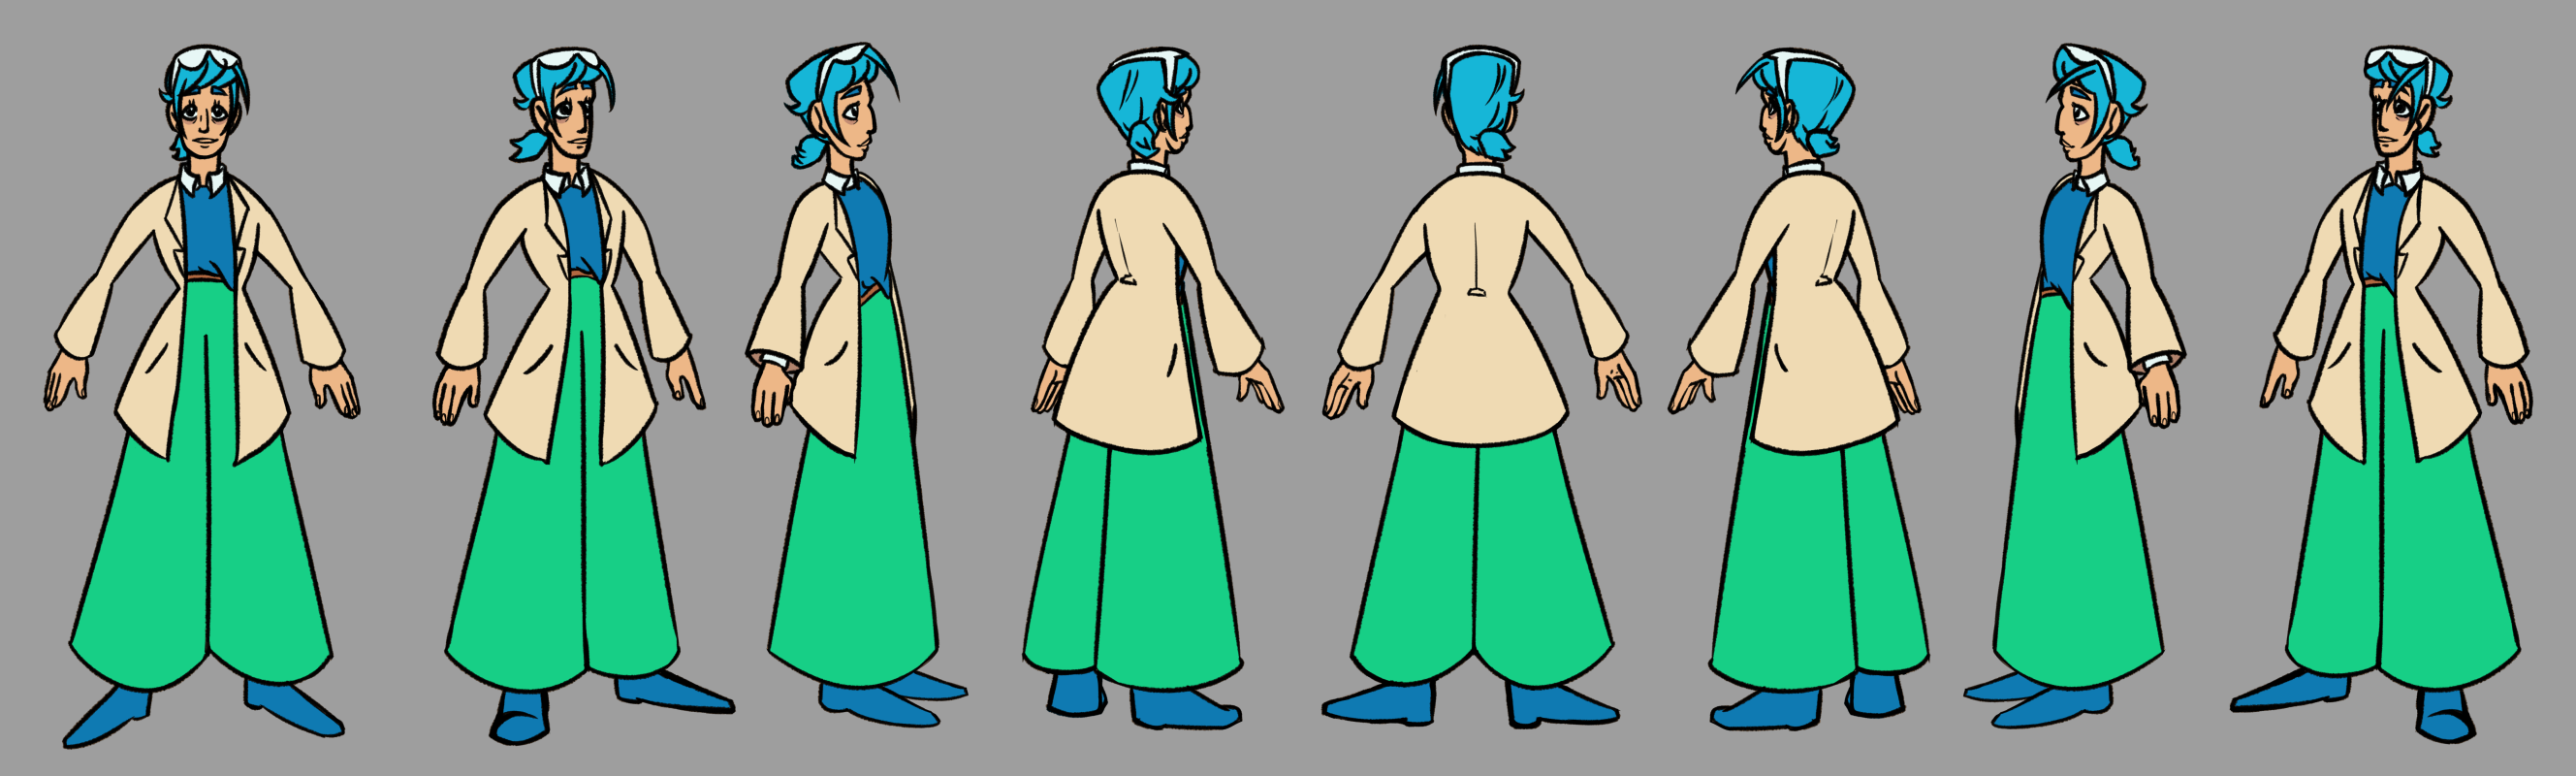 A character design turnaround of a scientist with blue hair in a messy ponytail, protective lab glasses, a cream colored coat, blue sweater, and green flared pants.